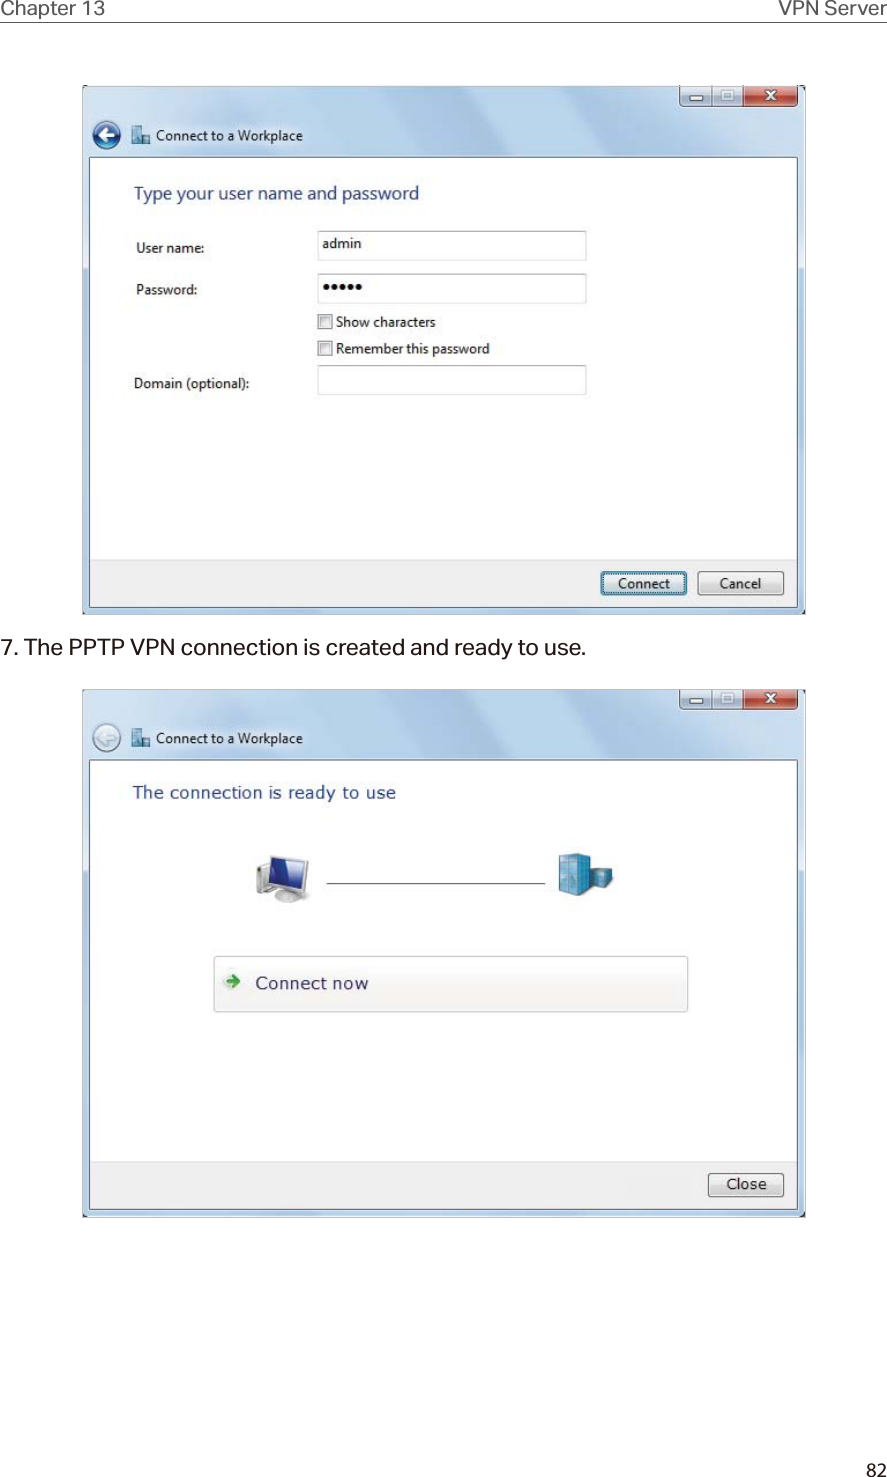 82Chapter 13 VPN Server7. The PPTP VPN connection is created and ready to use.